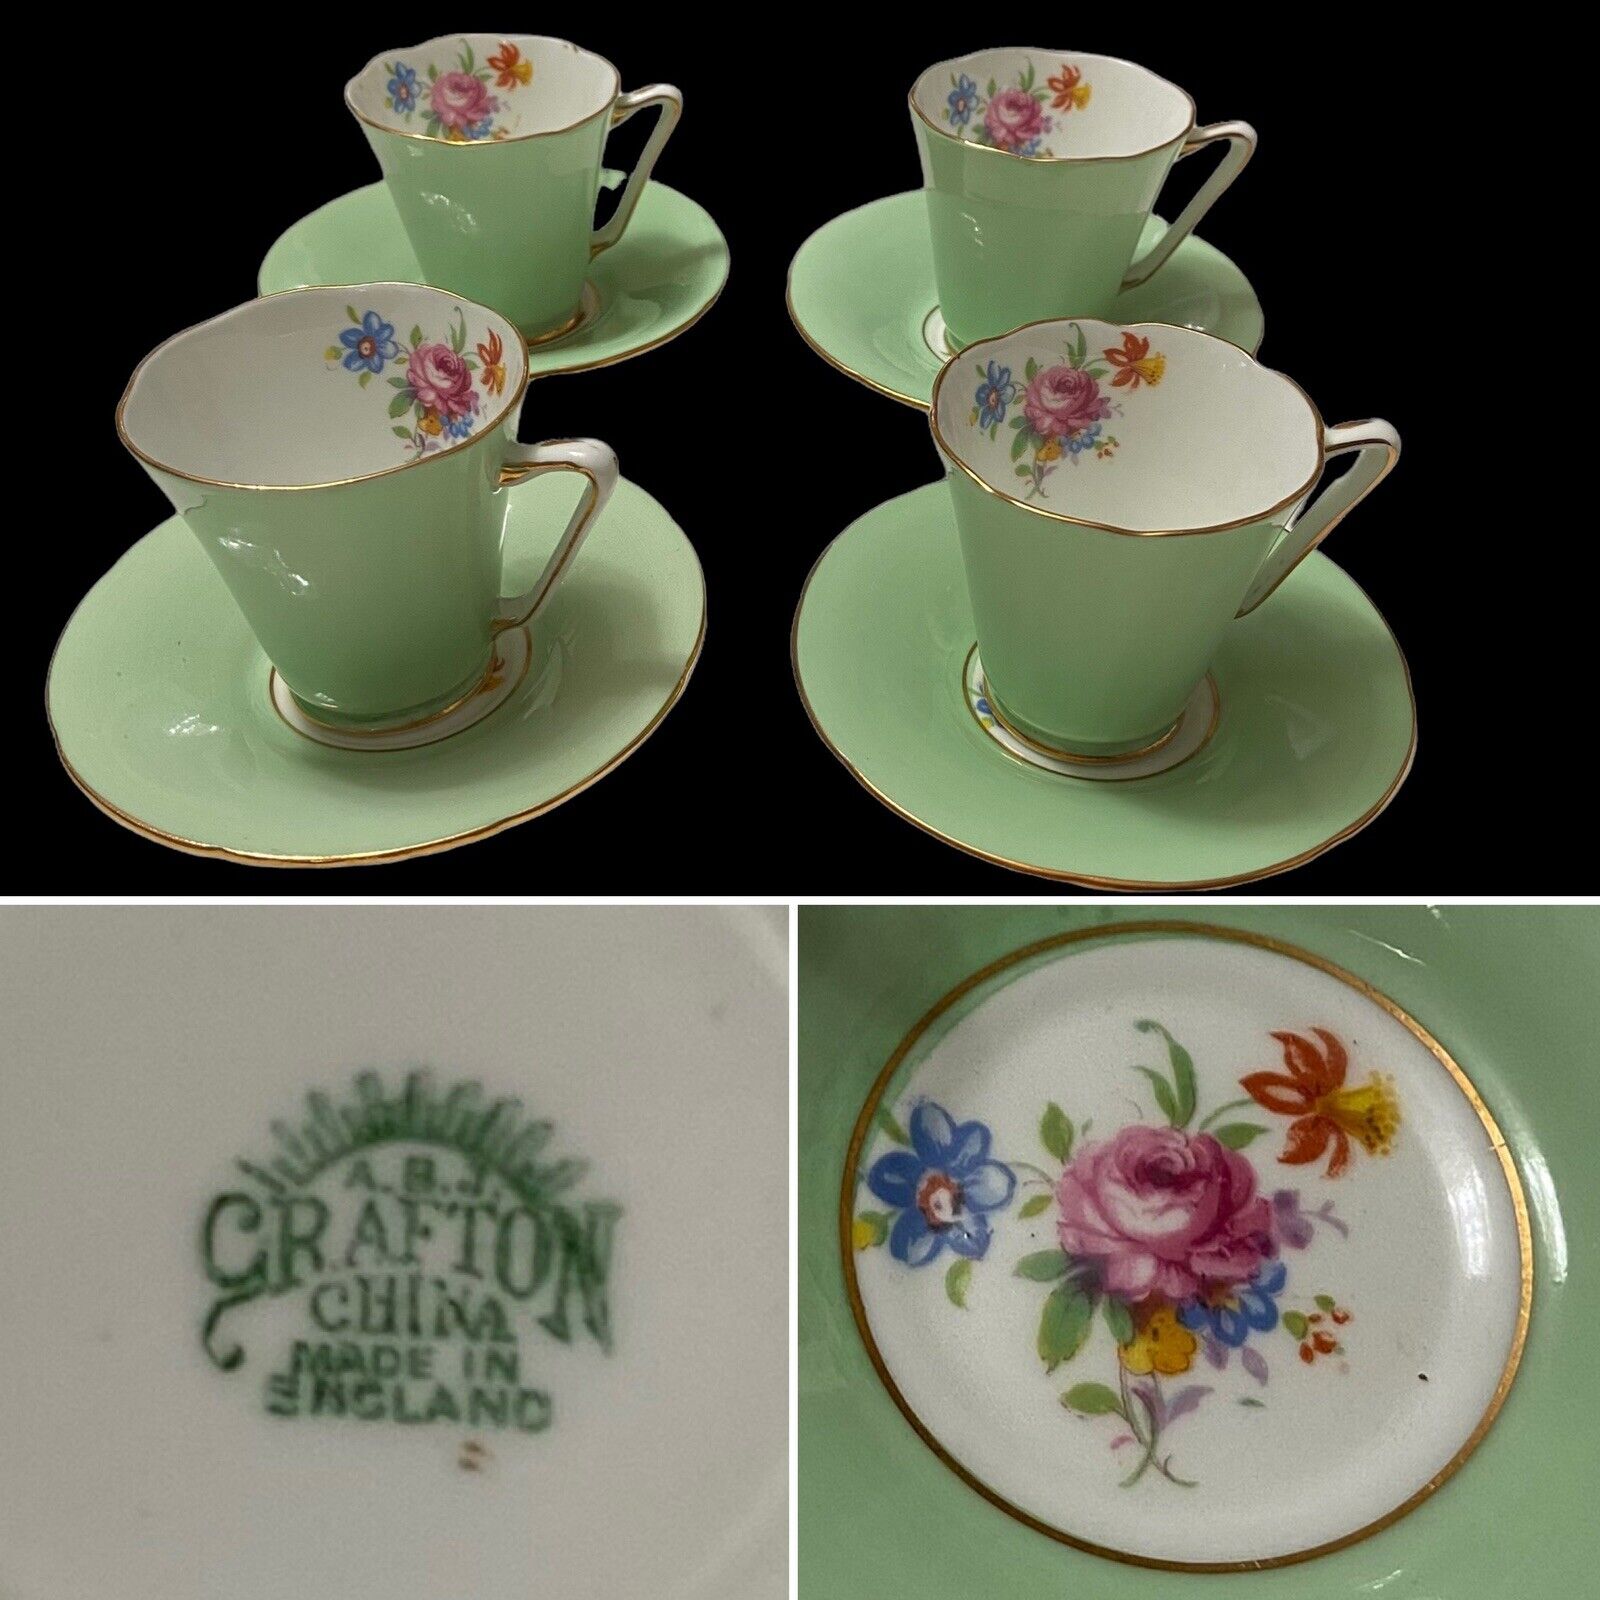 Vintage A.B.J. GRAFTON 1935-1948 Demitasse Cups and Saucers Set of 4 ENGLAND